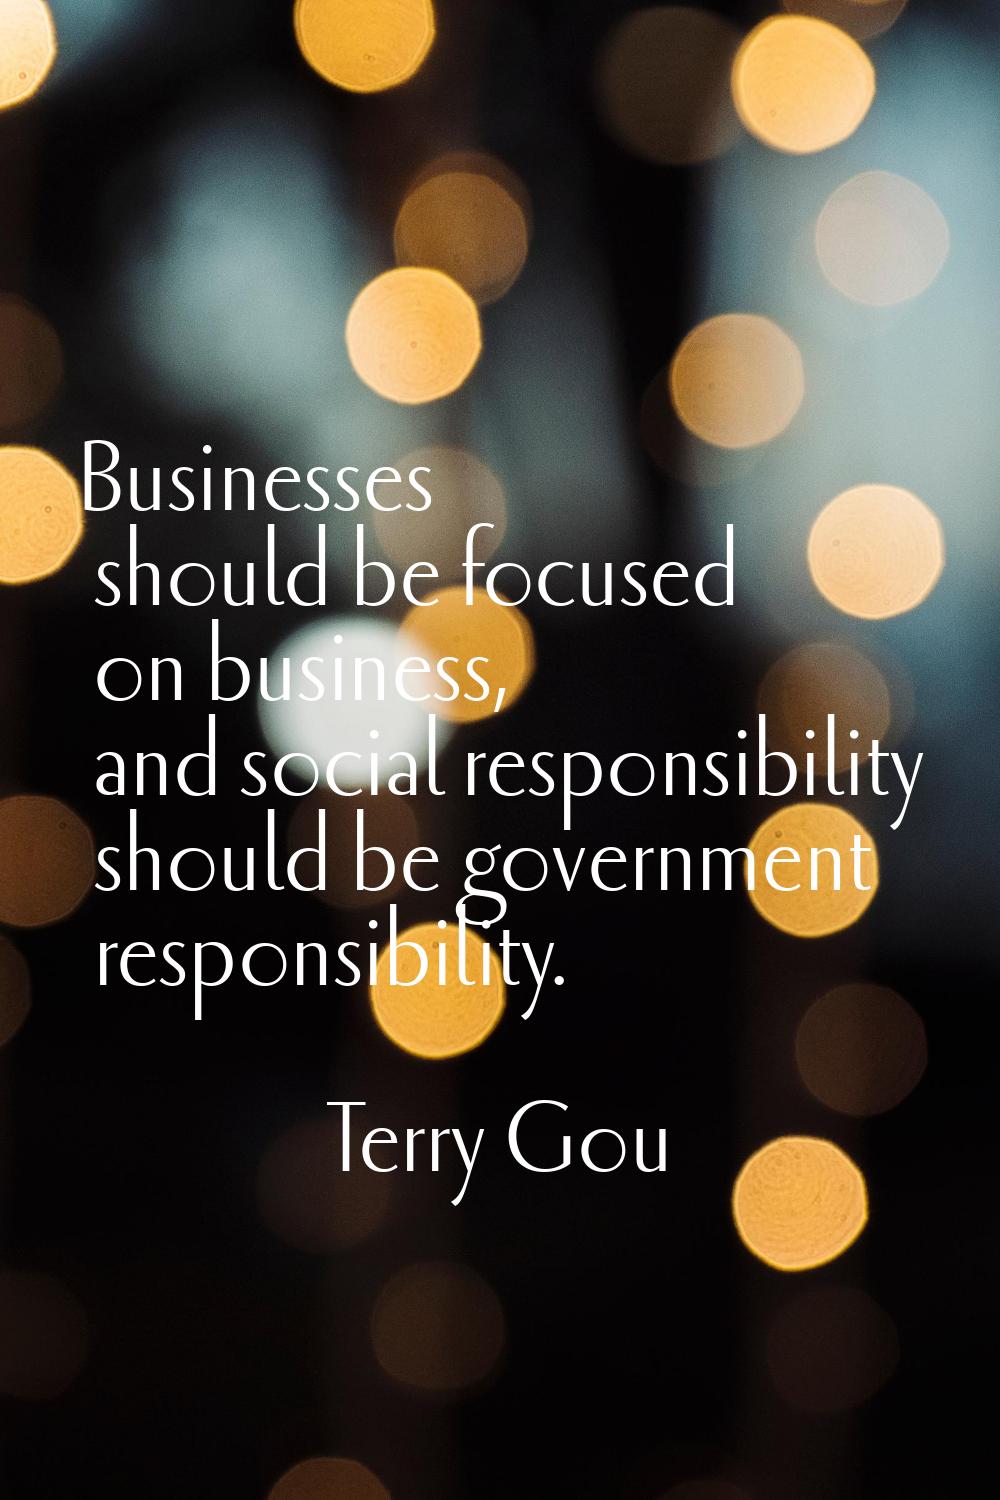 Businesses should be focused on business, and social responsibility should be government responsibi